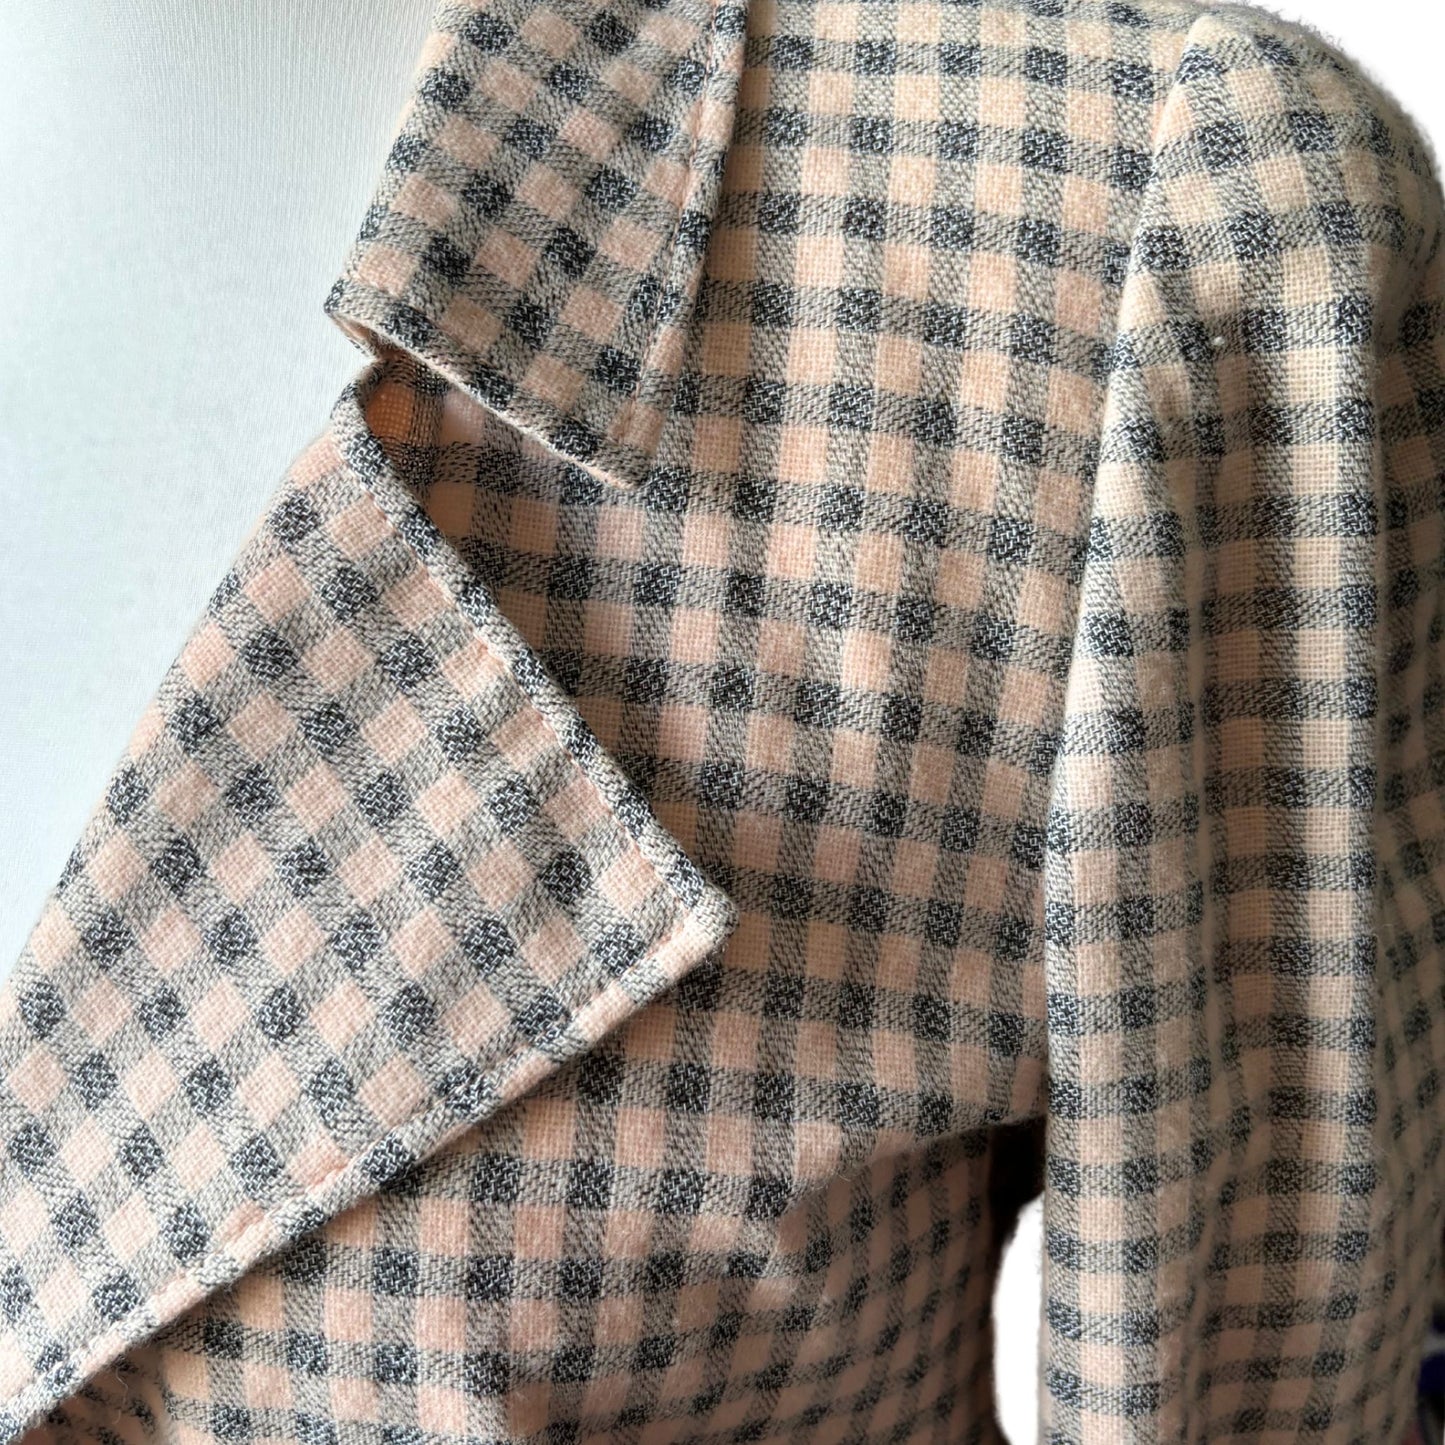 Vintage 80s Pink and Grey Check Long Sleeved Jacket. . Approx UK size 12 - 16